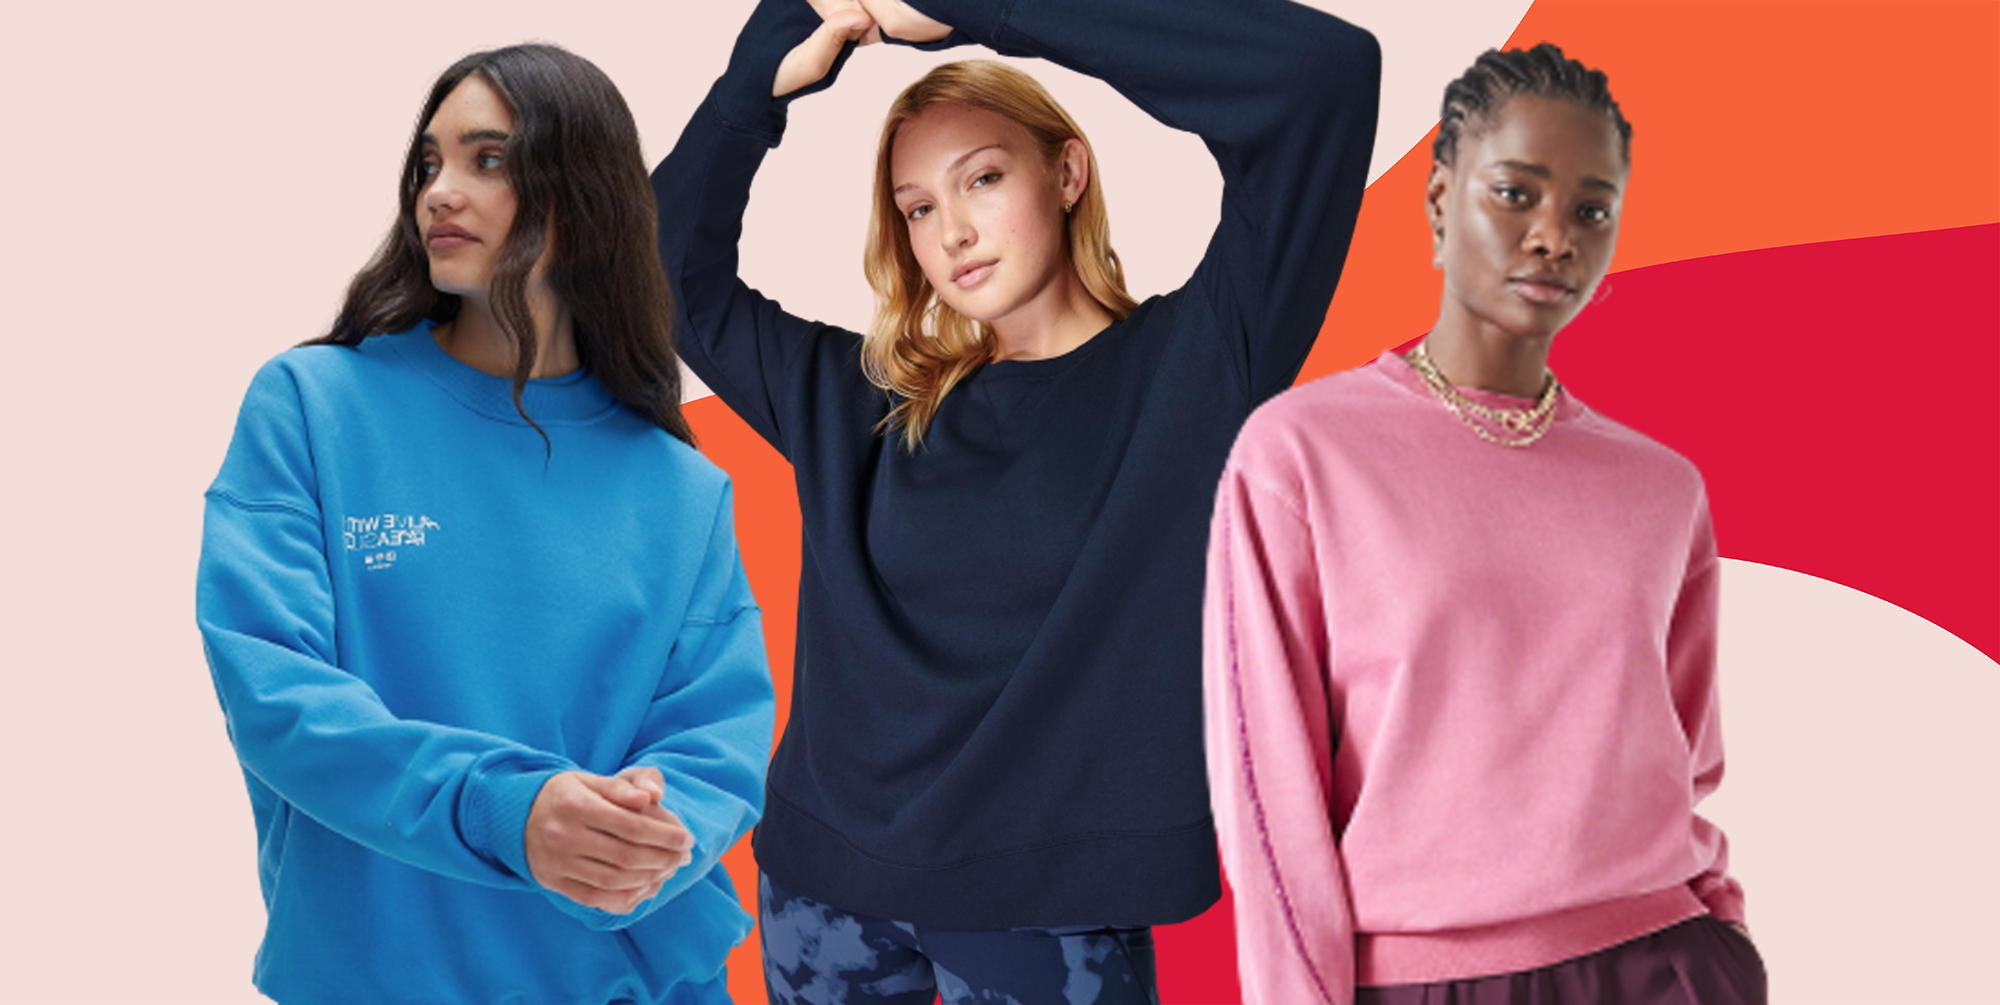 A shopping guide to the best … women's sweatshirts